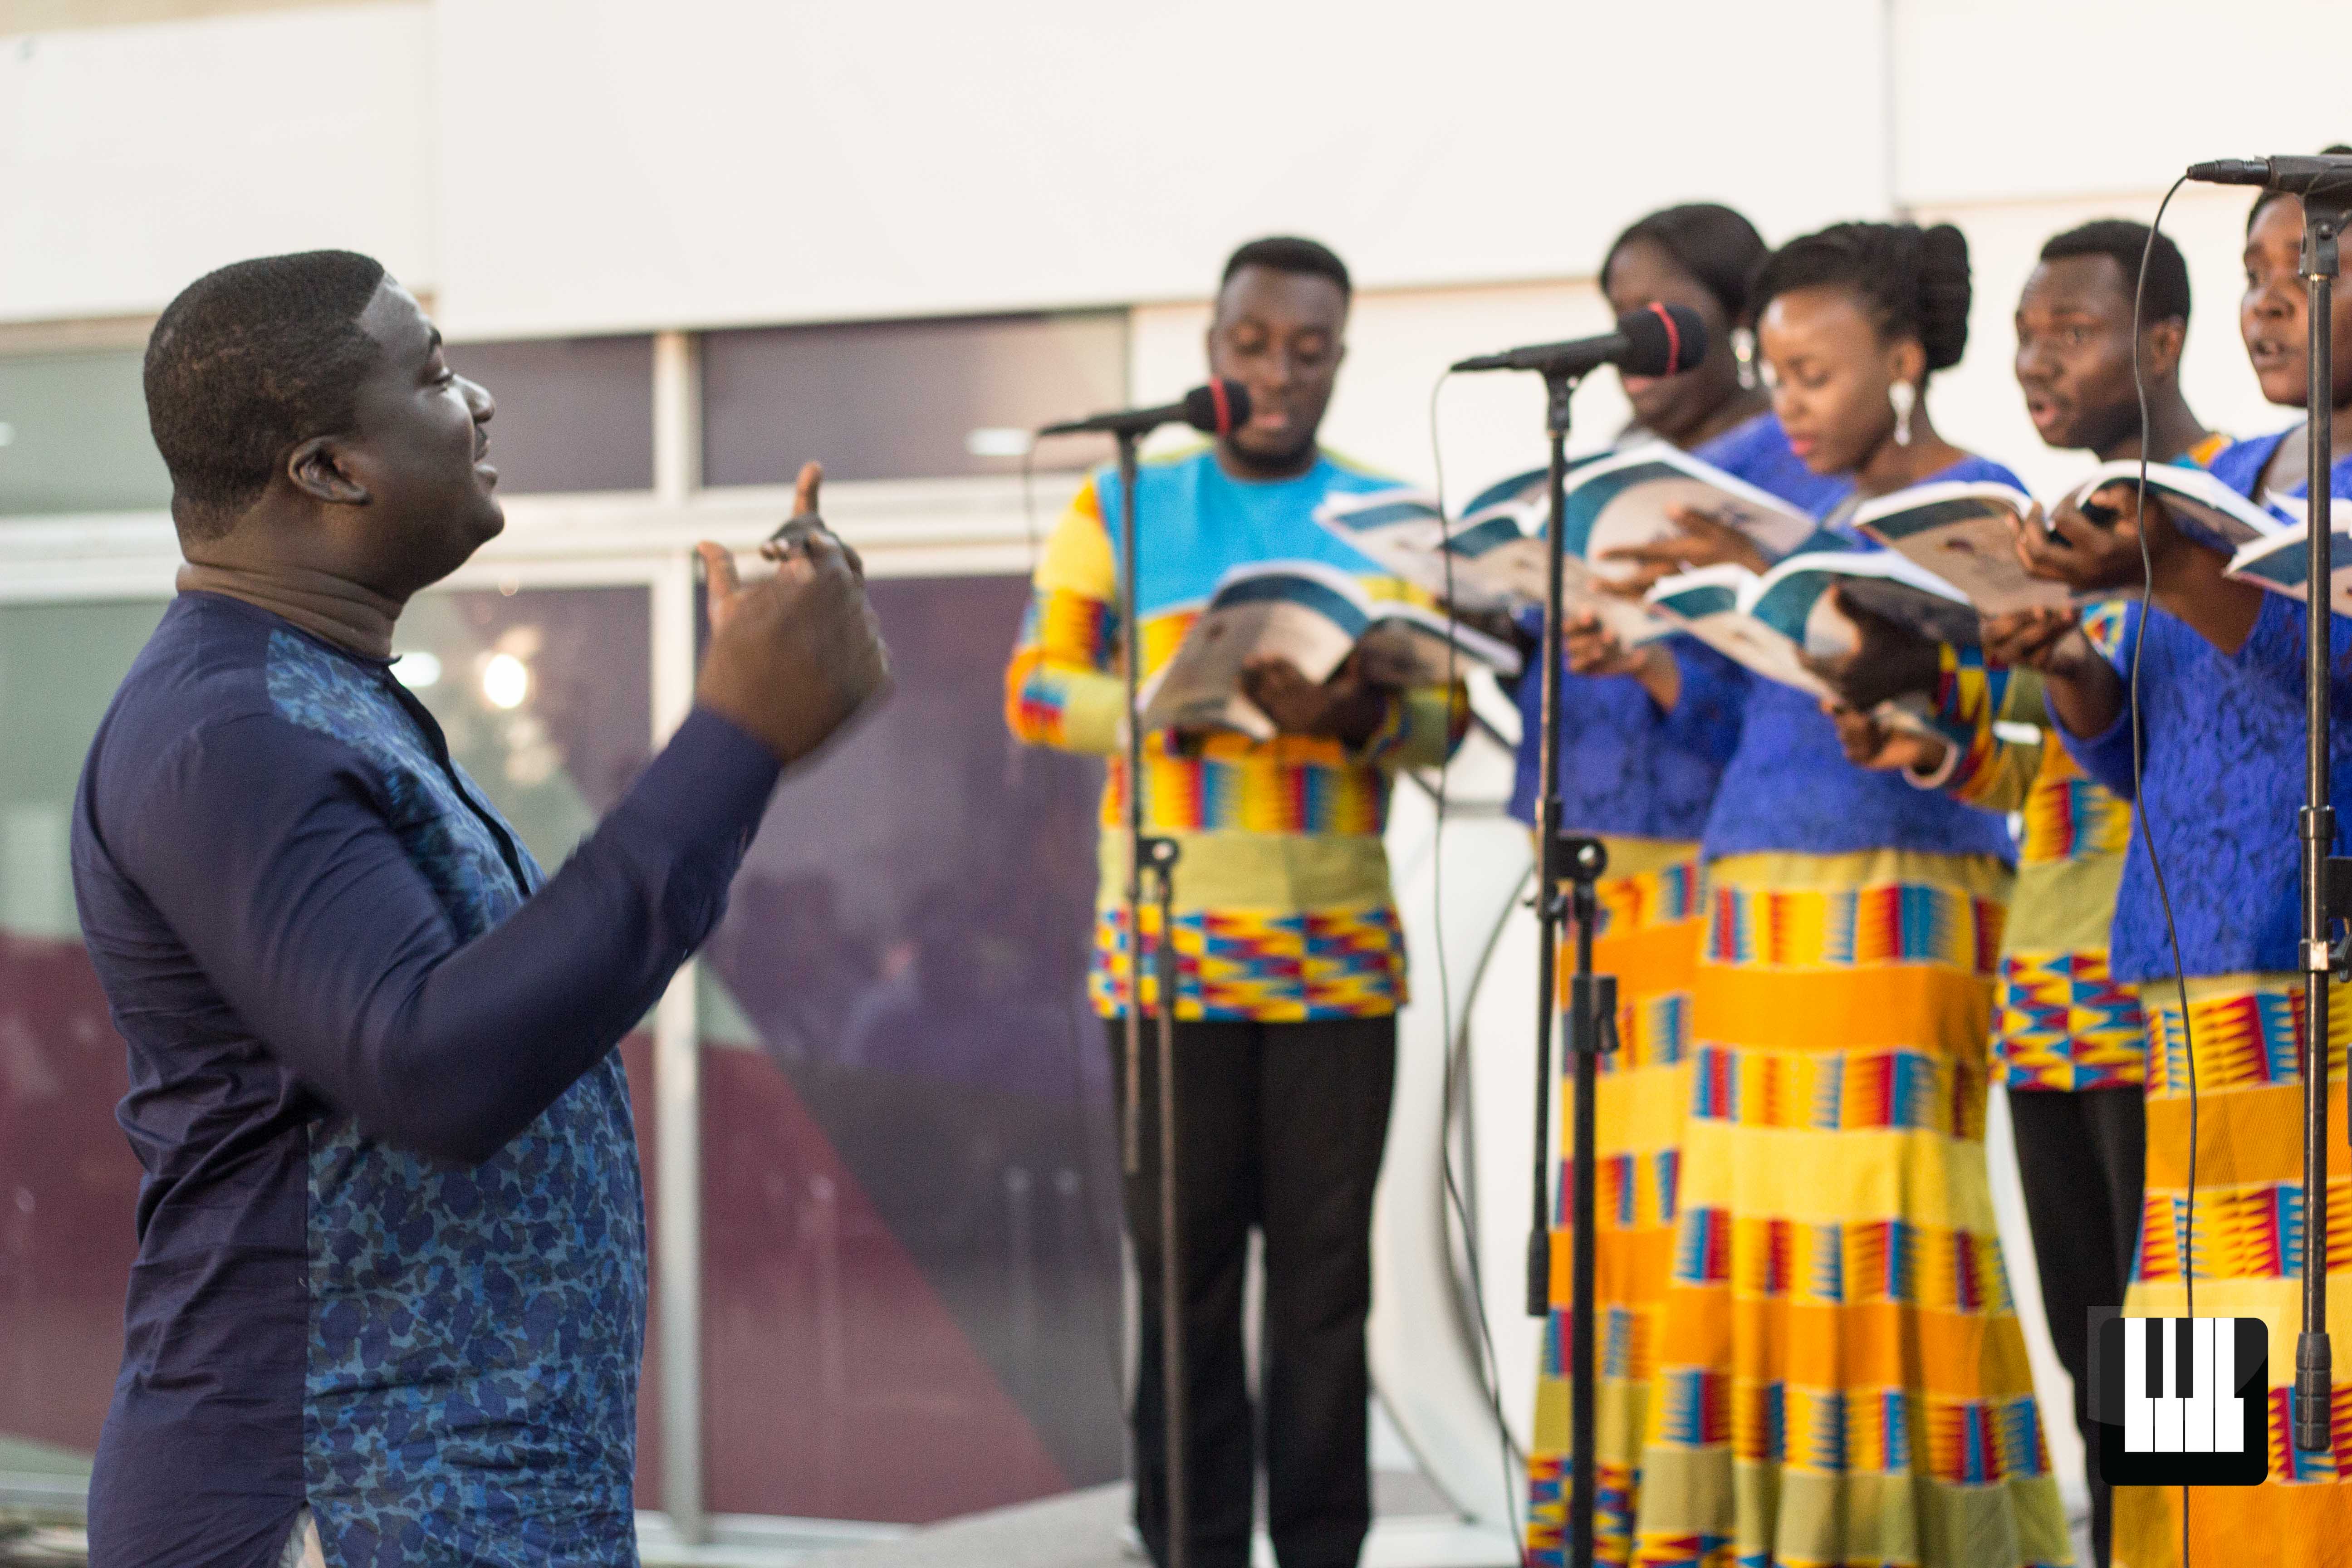 Joseph & His Brethren Premiers in Africa We look forward to one of the biggest musical events this year, as Harmonious Chorale premiers Handel's Joseph and his Brethren in Accra.